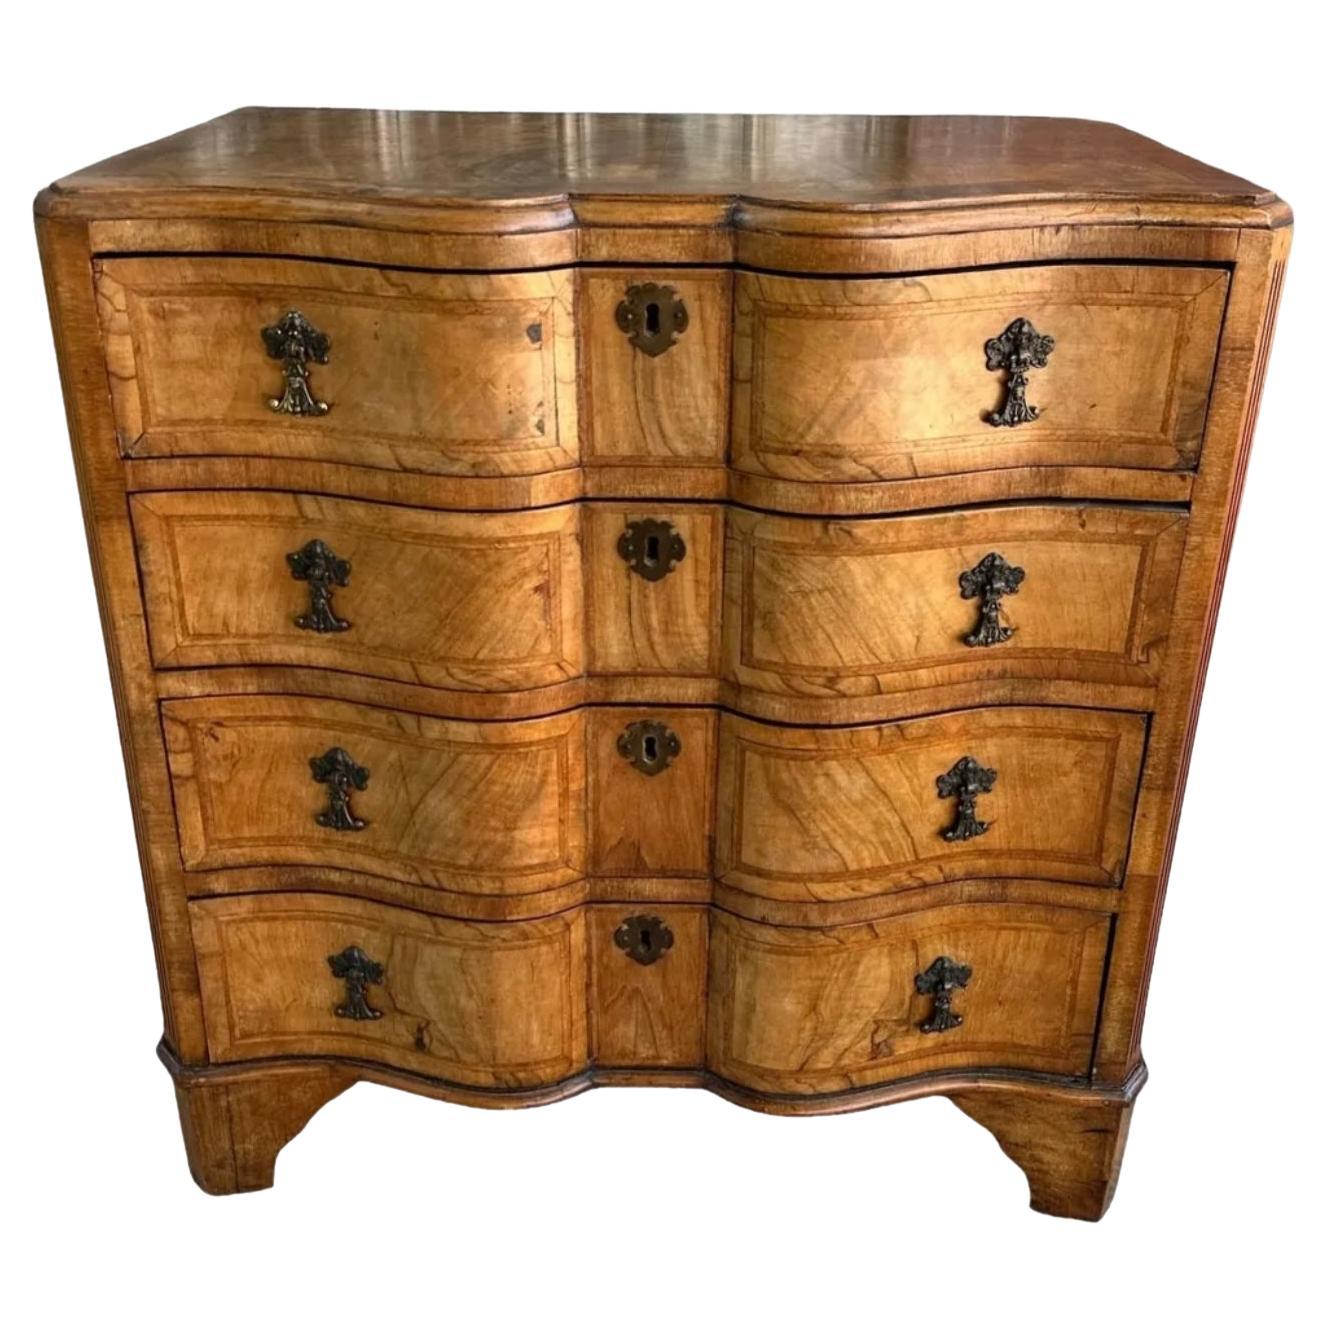 Early Banded Inlaid Walnut Serpentine Front Chest